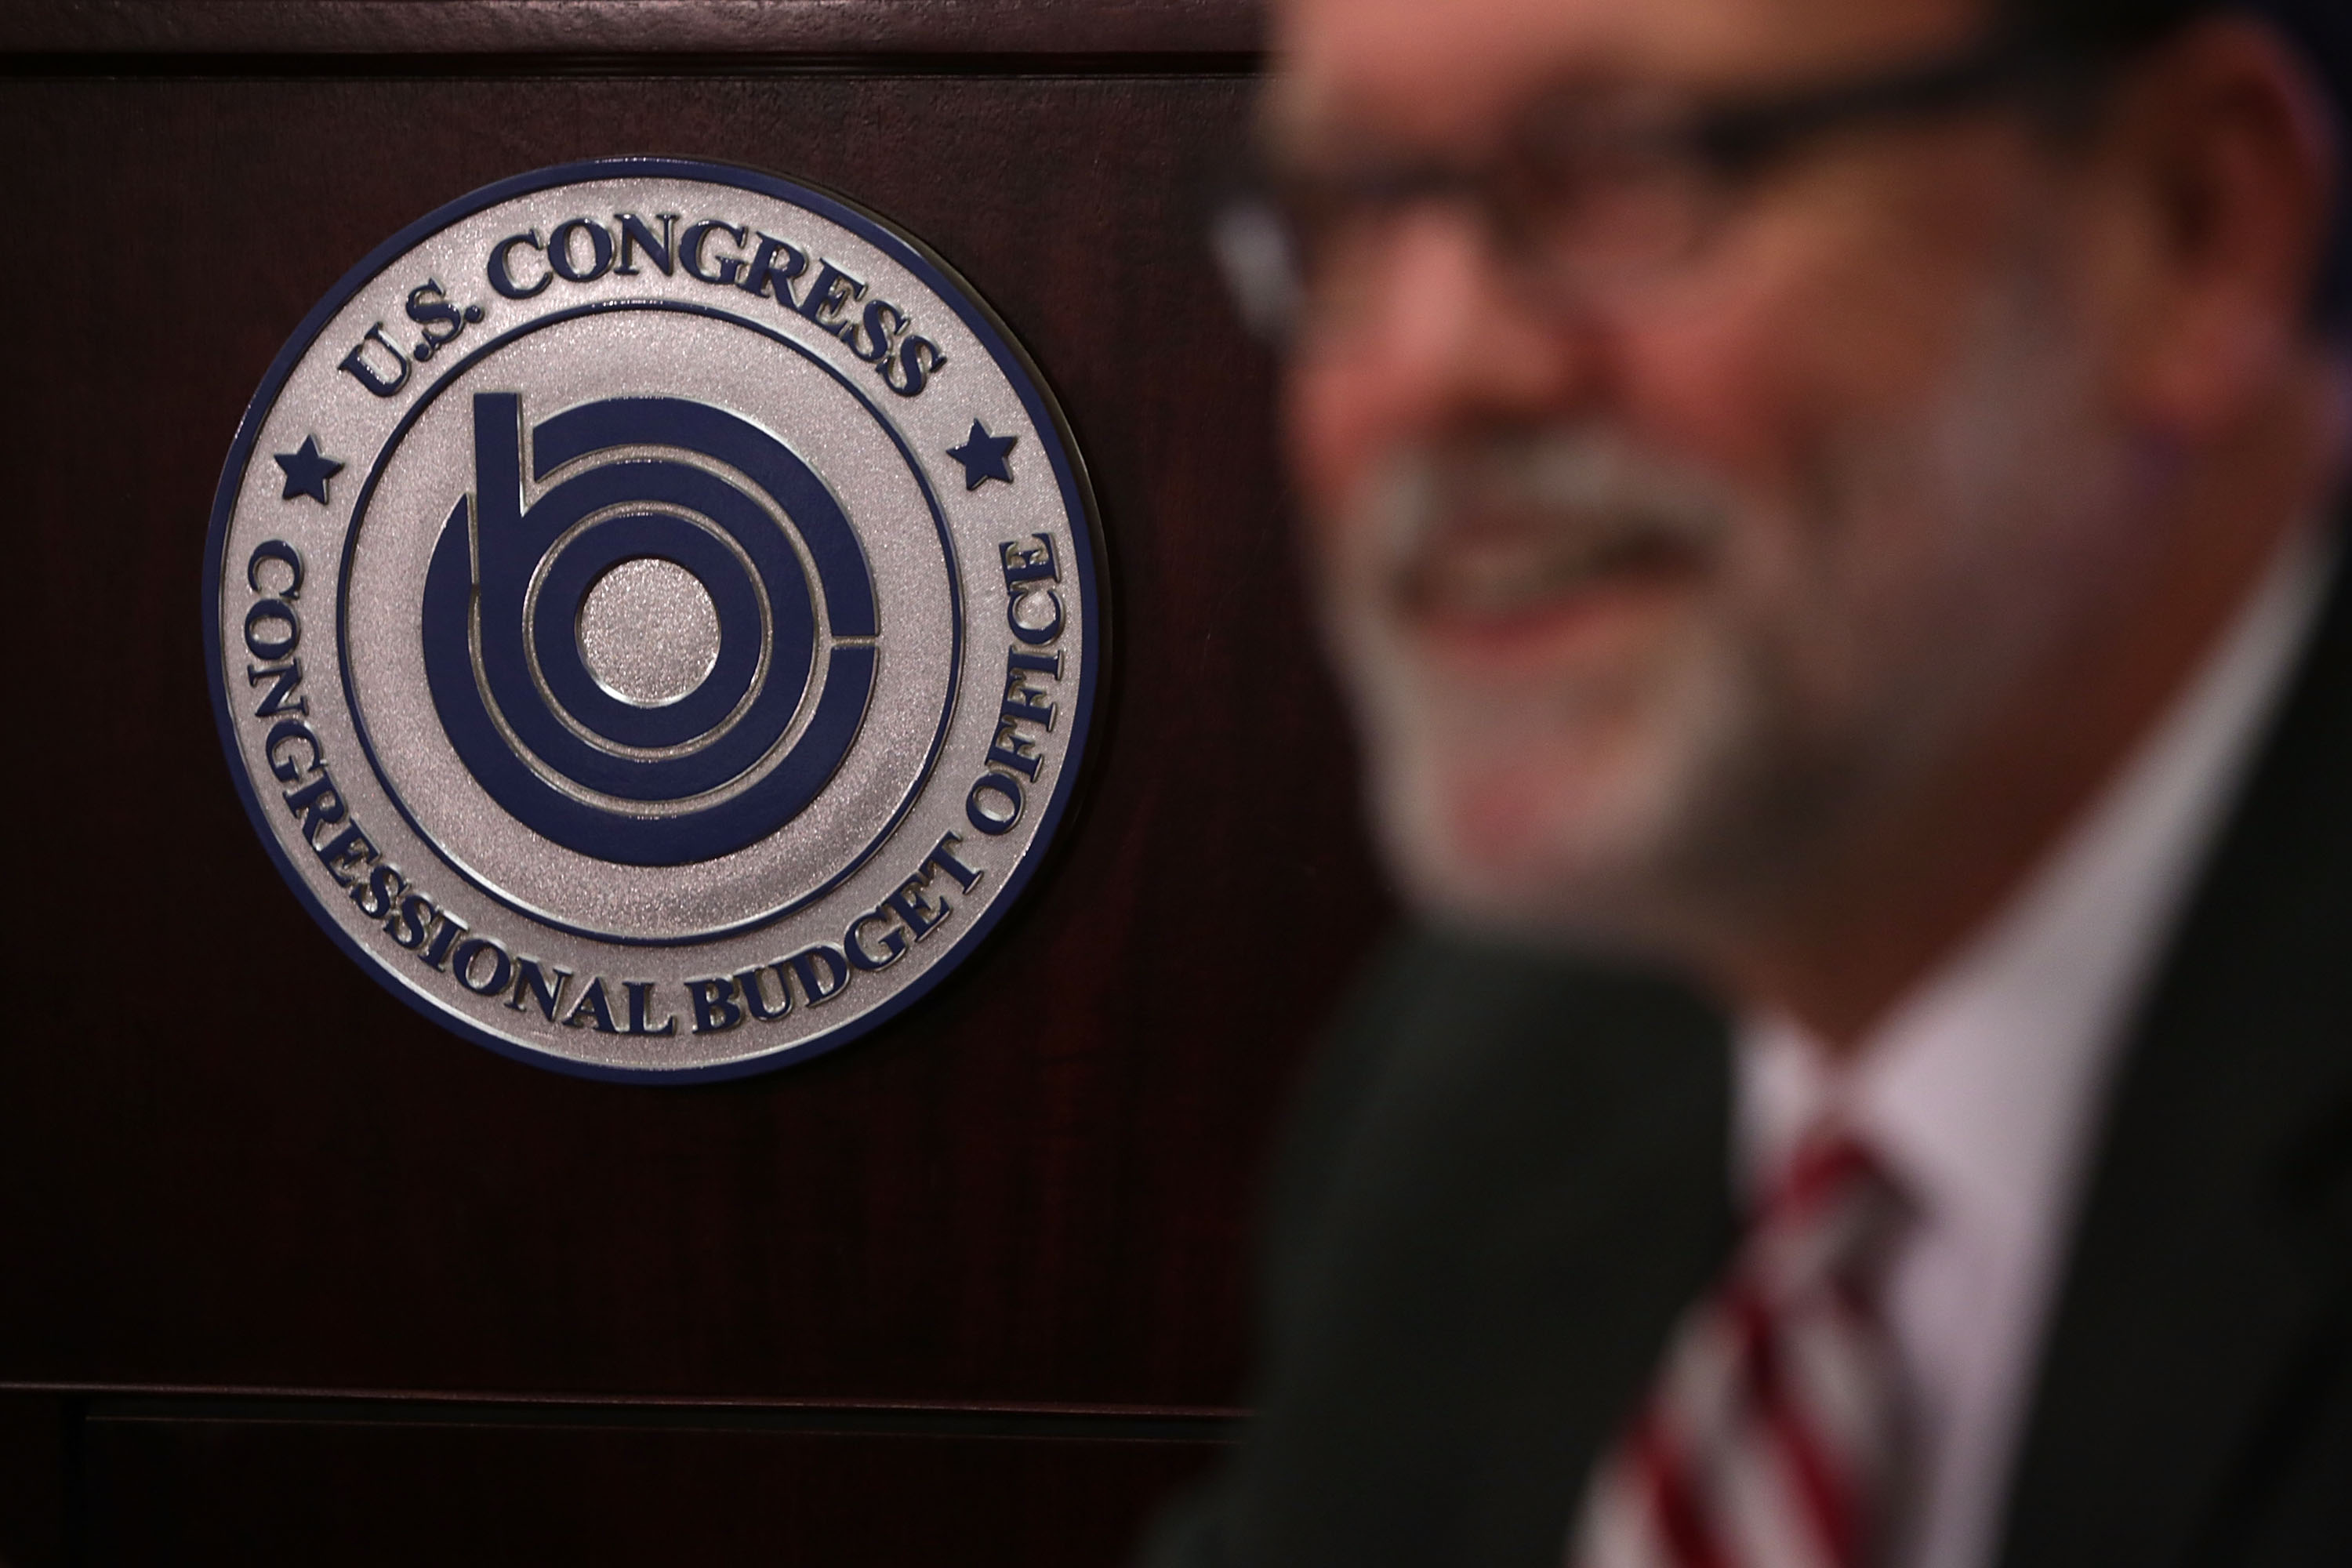 The Congressional Budget Office logo.